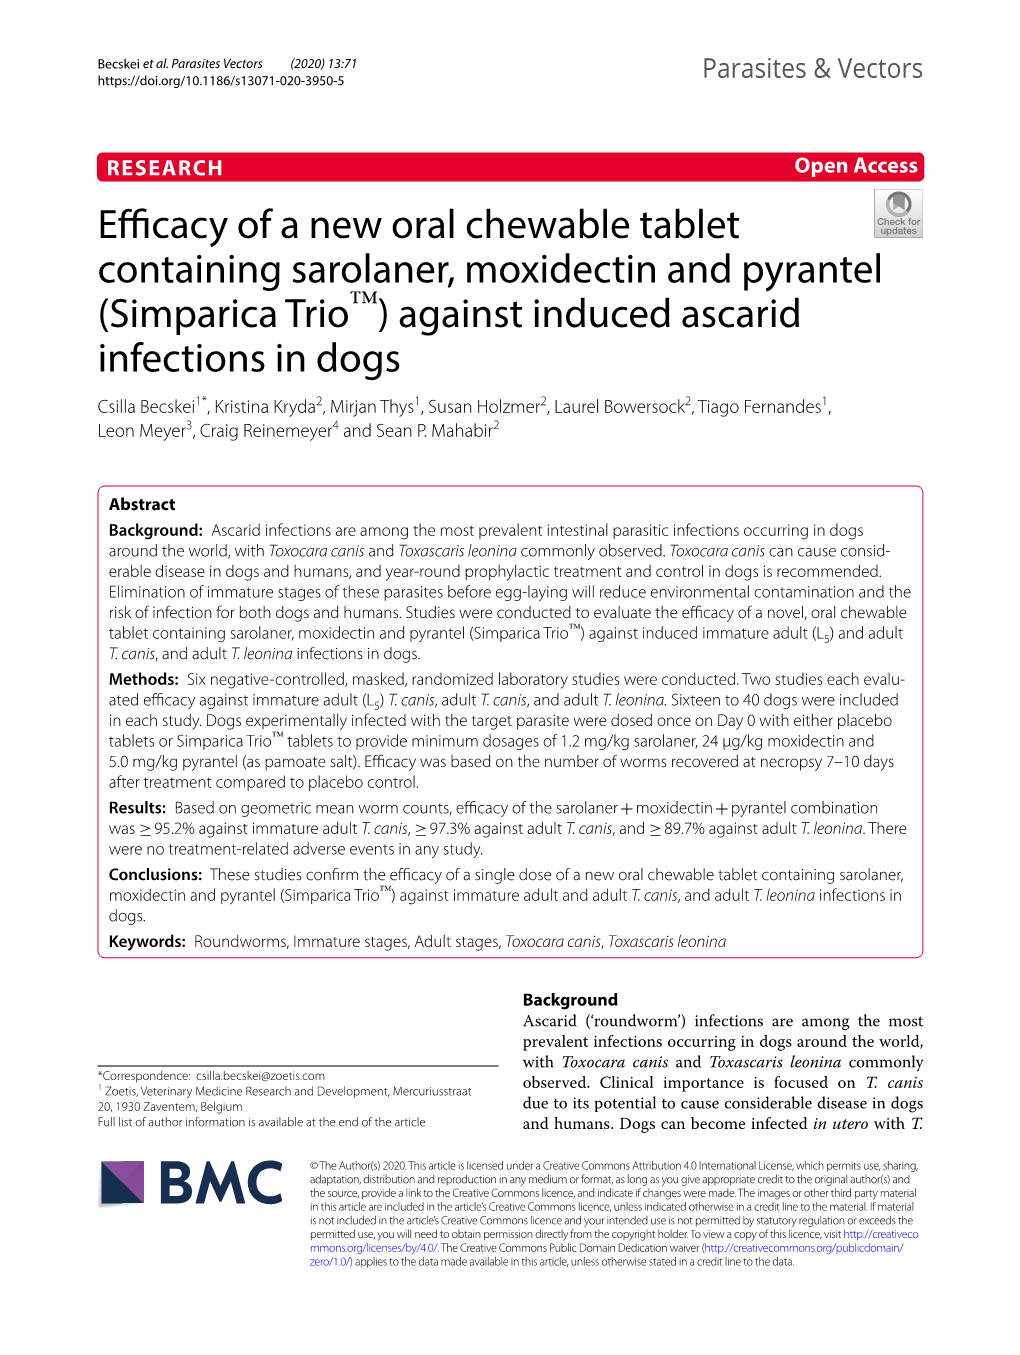 Efficacy of a New Oral Chewable Tablet Containing Sarolaner, Moxidectin